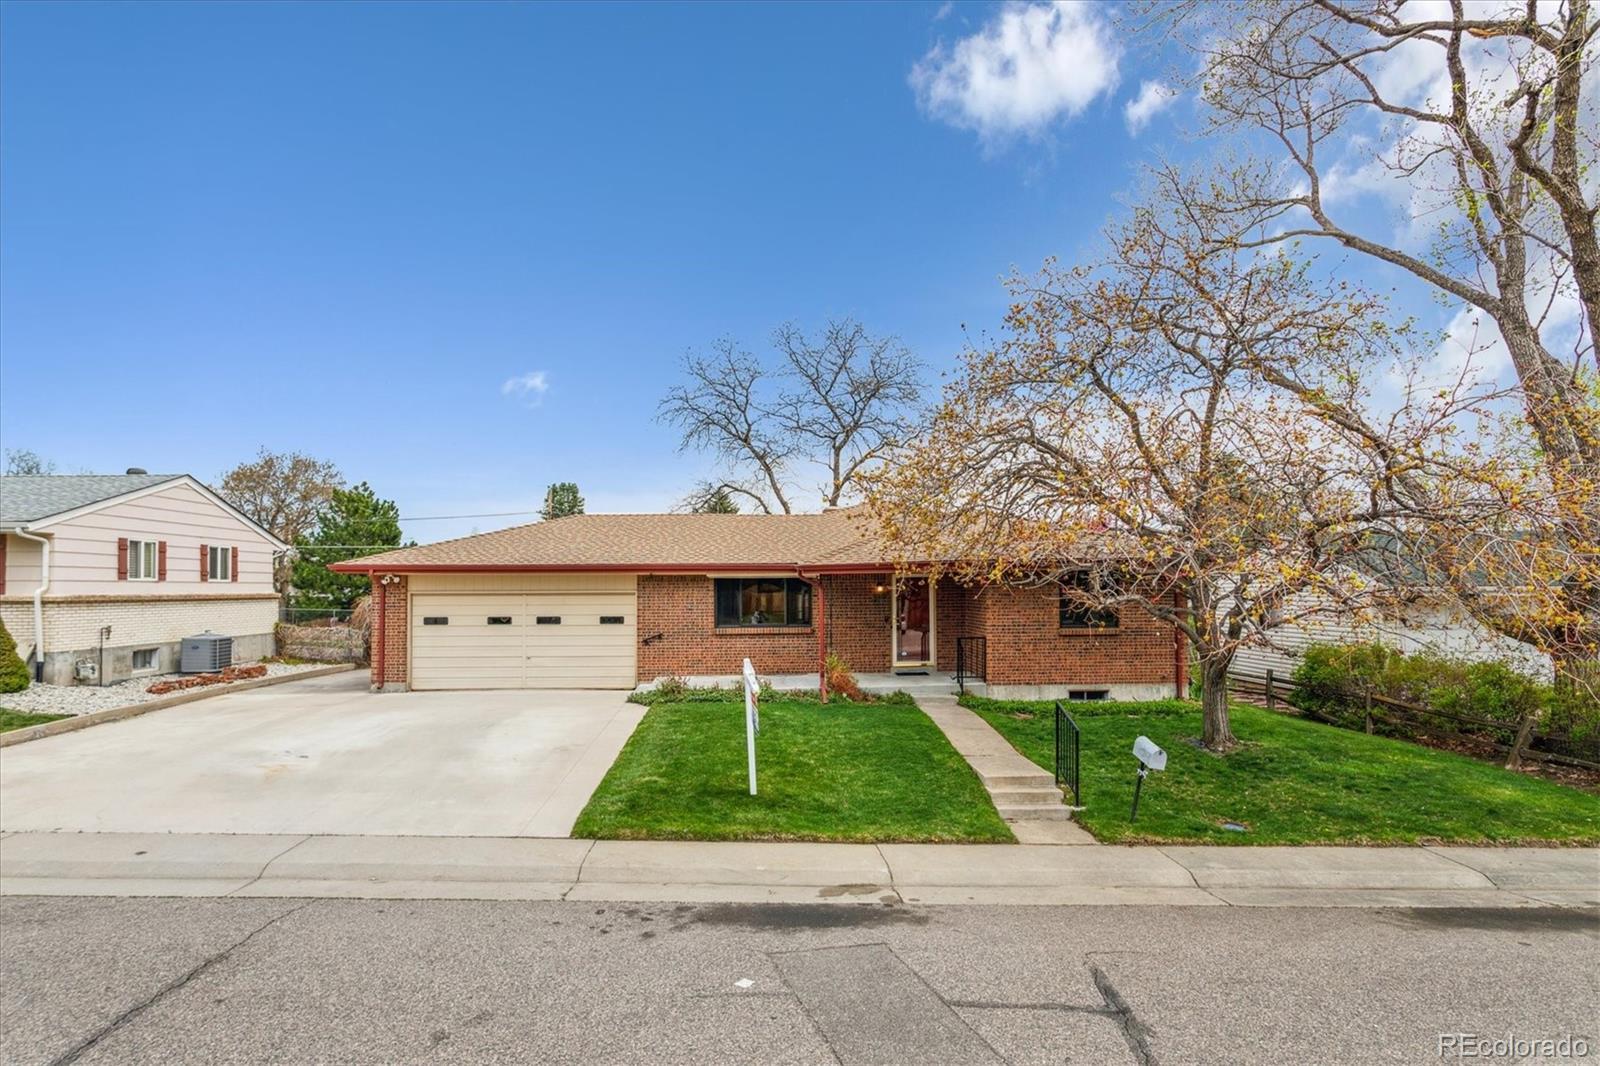 Photo one of 5310 Beech St Arvada CO 80002 | MLS 2970502